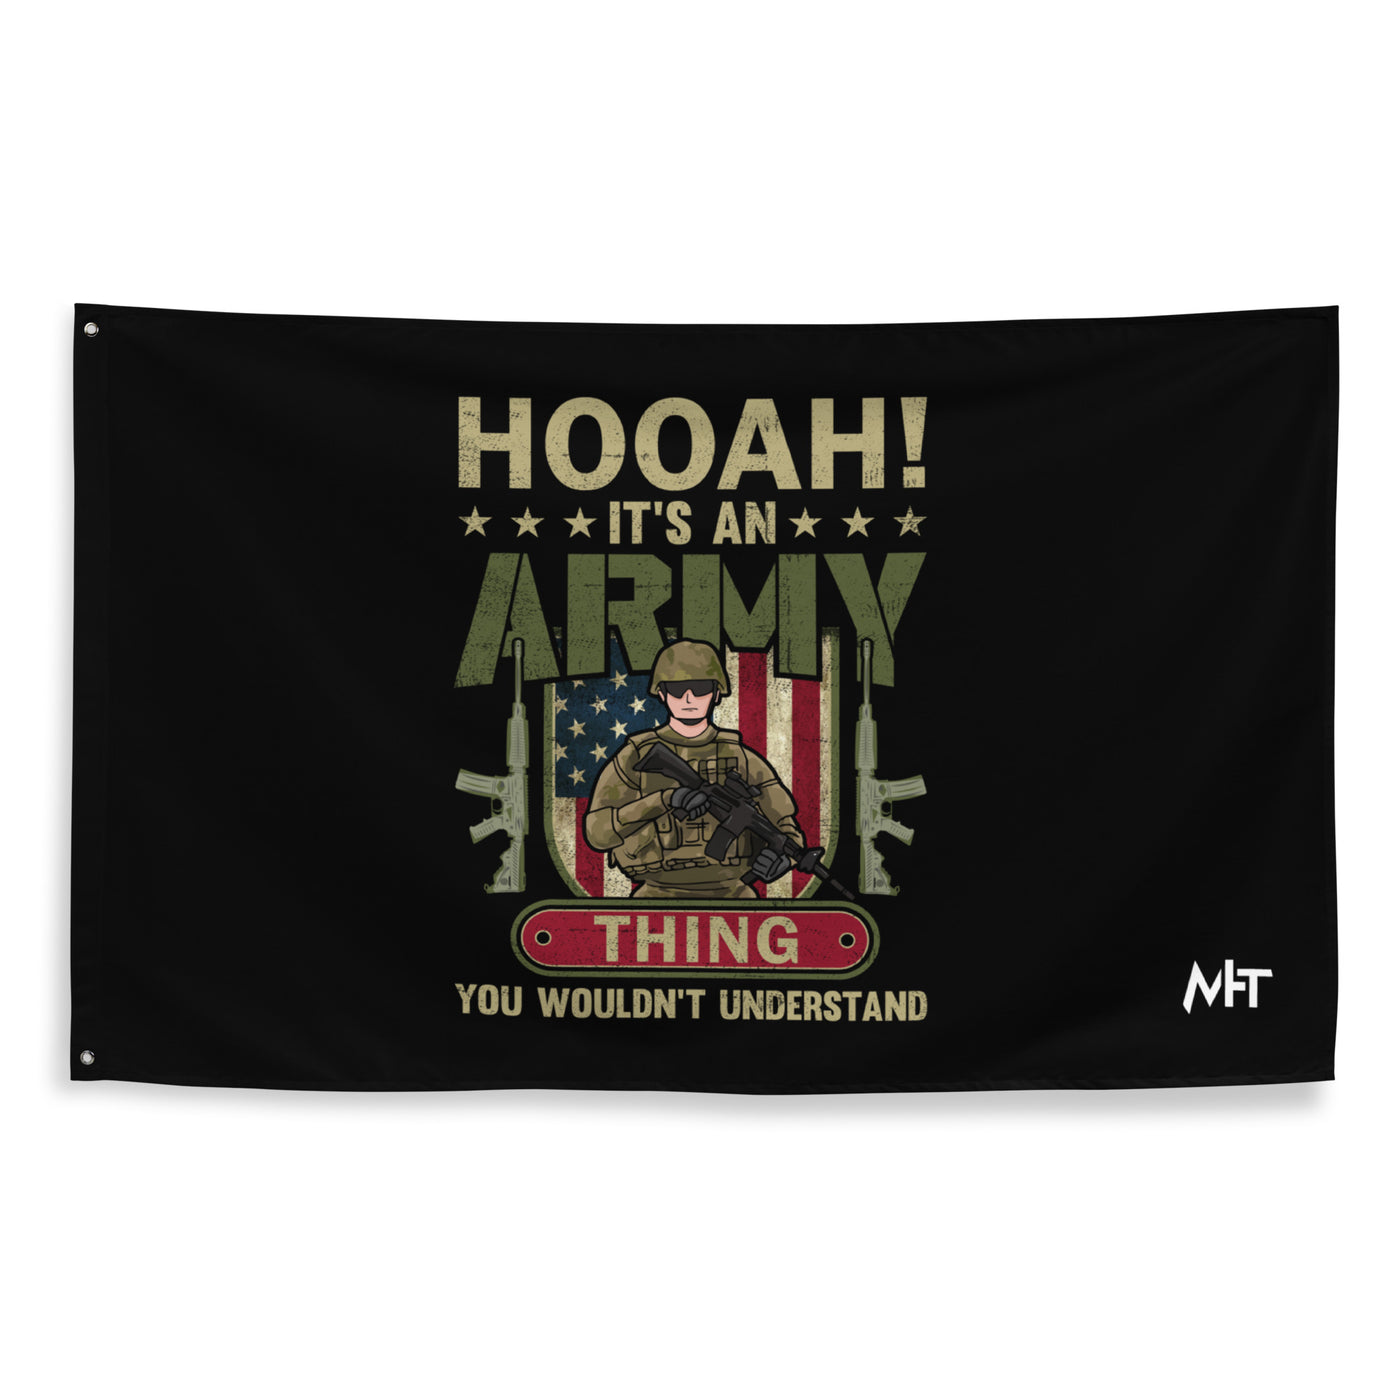 HOOAH! It's an Army thing you wouldn't understand - Flag